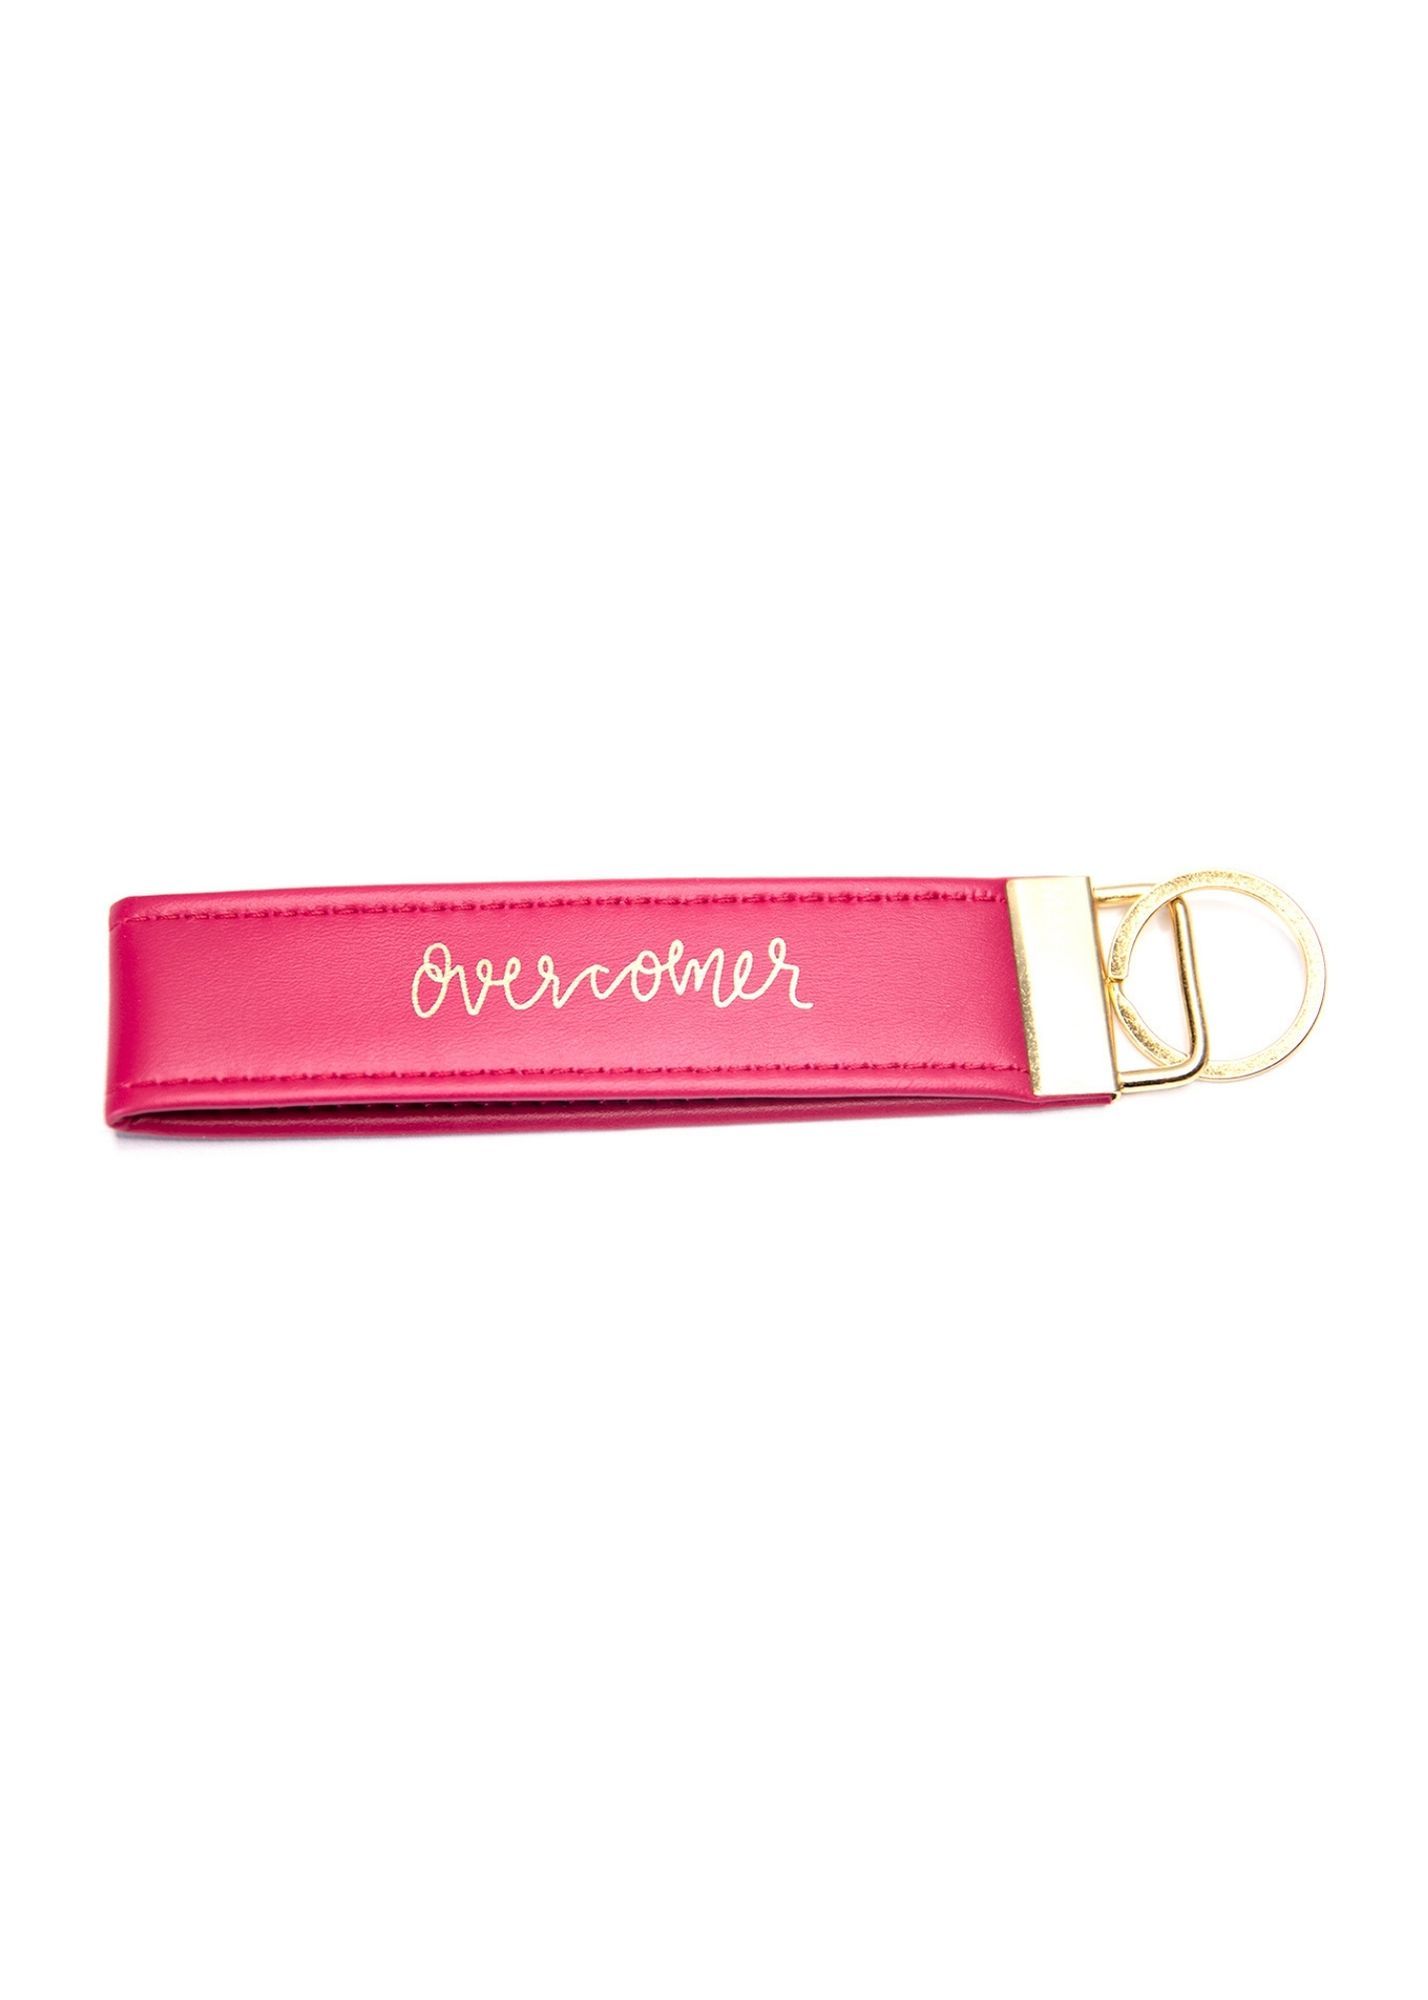 Inspirational Faux Leather Key Fob Accessories Mary Square Overcomer